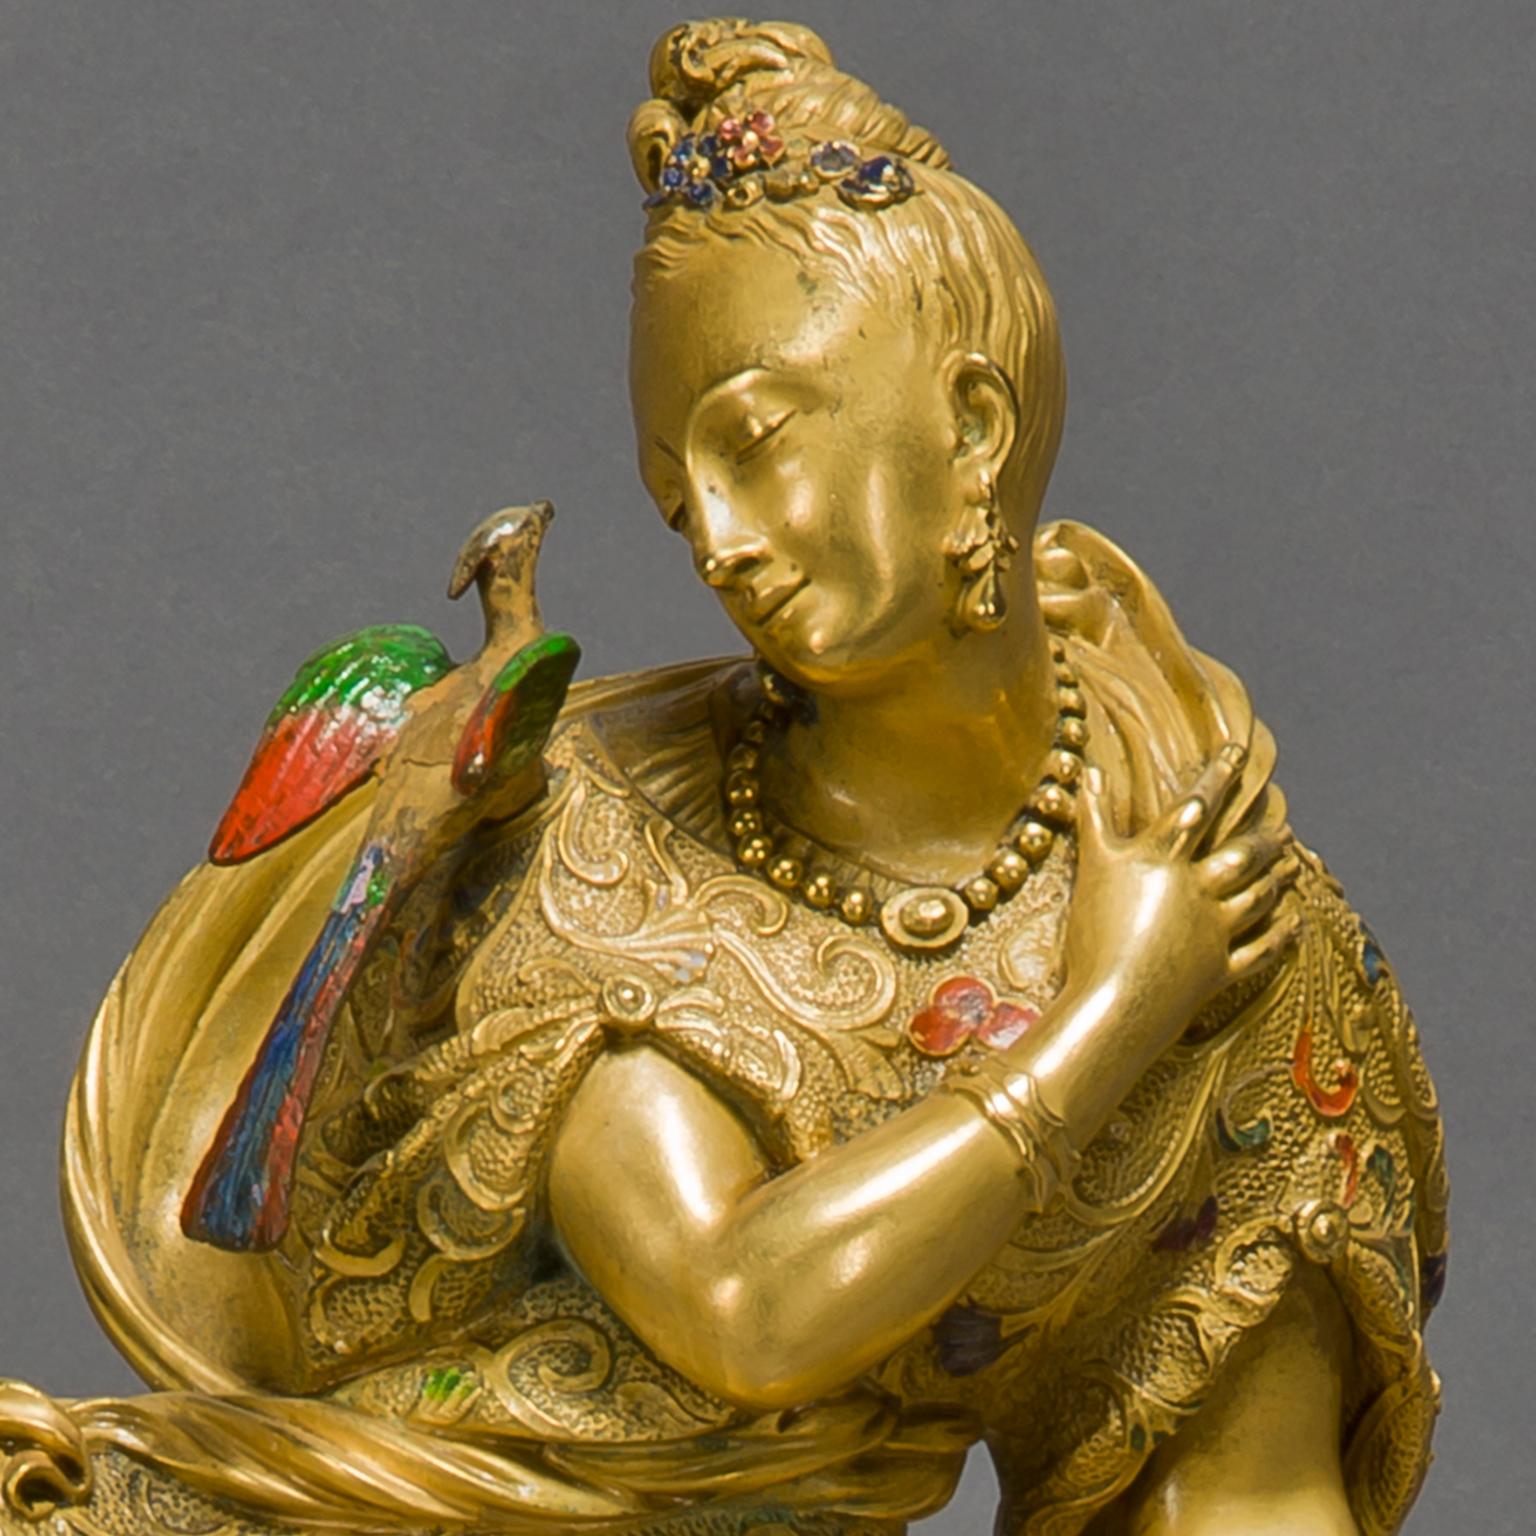 A rare Chinoiserie style gilt-bronze and enamel figural clock.

This elegant and sophisticated clock has a finely chiselled gilt-bronze case with gold and enamel highlights. It depicts a woman in Chinoiserie costume with an attendant bird of